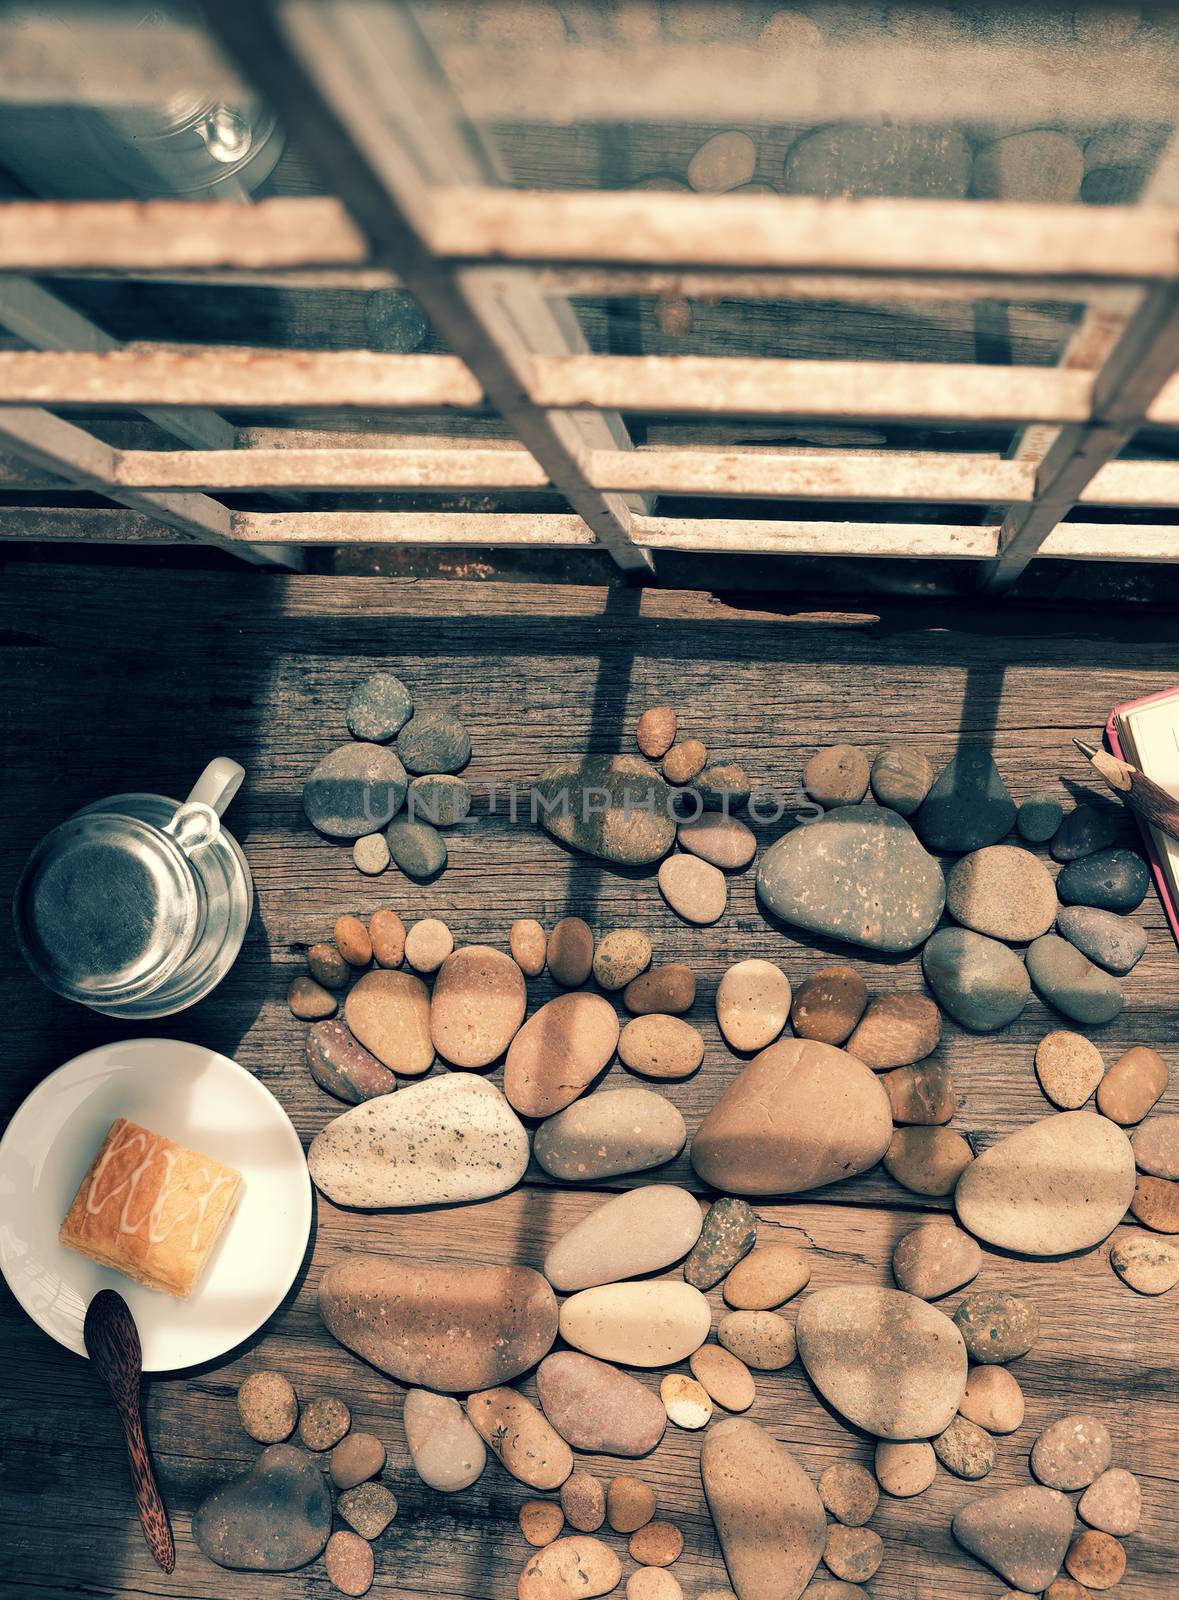 Relax morning for new day with coffee time in cafeteria, abstract cafe interior with table near glass window, pebbles background make group of foot, romantic view for breakfast in vintage color